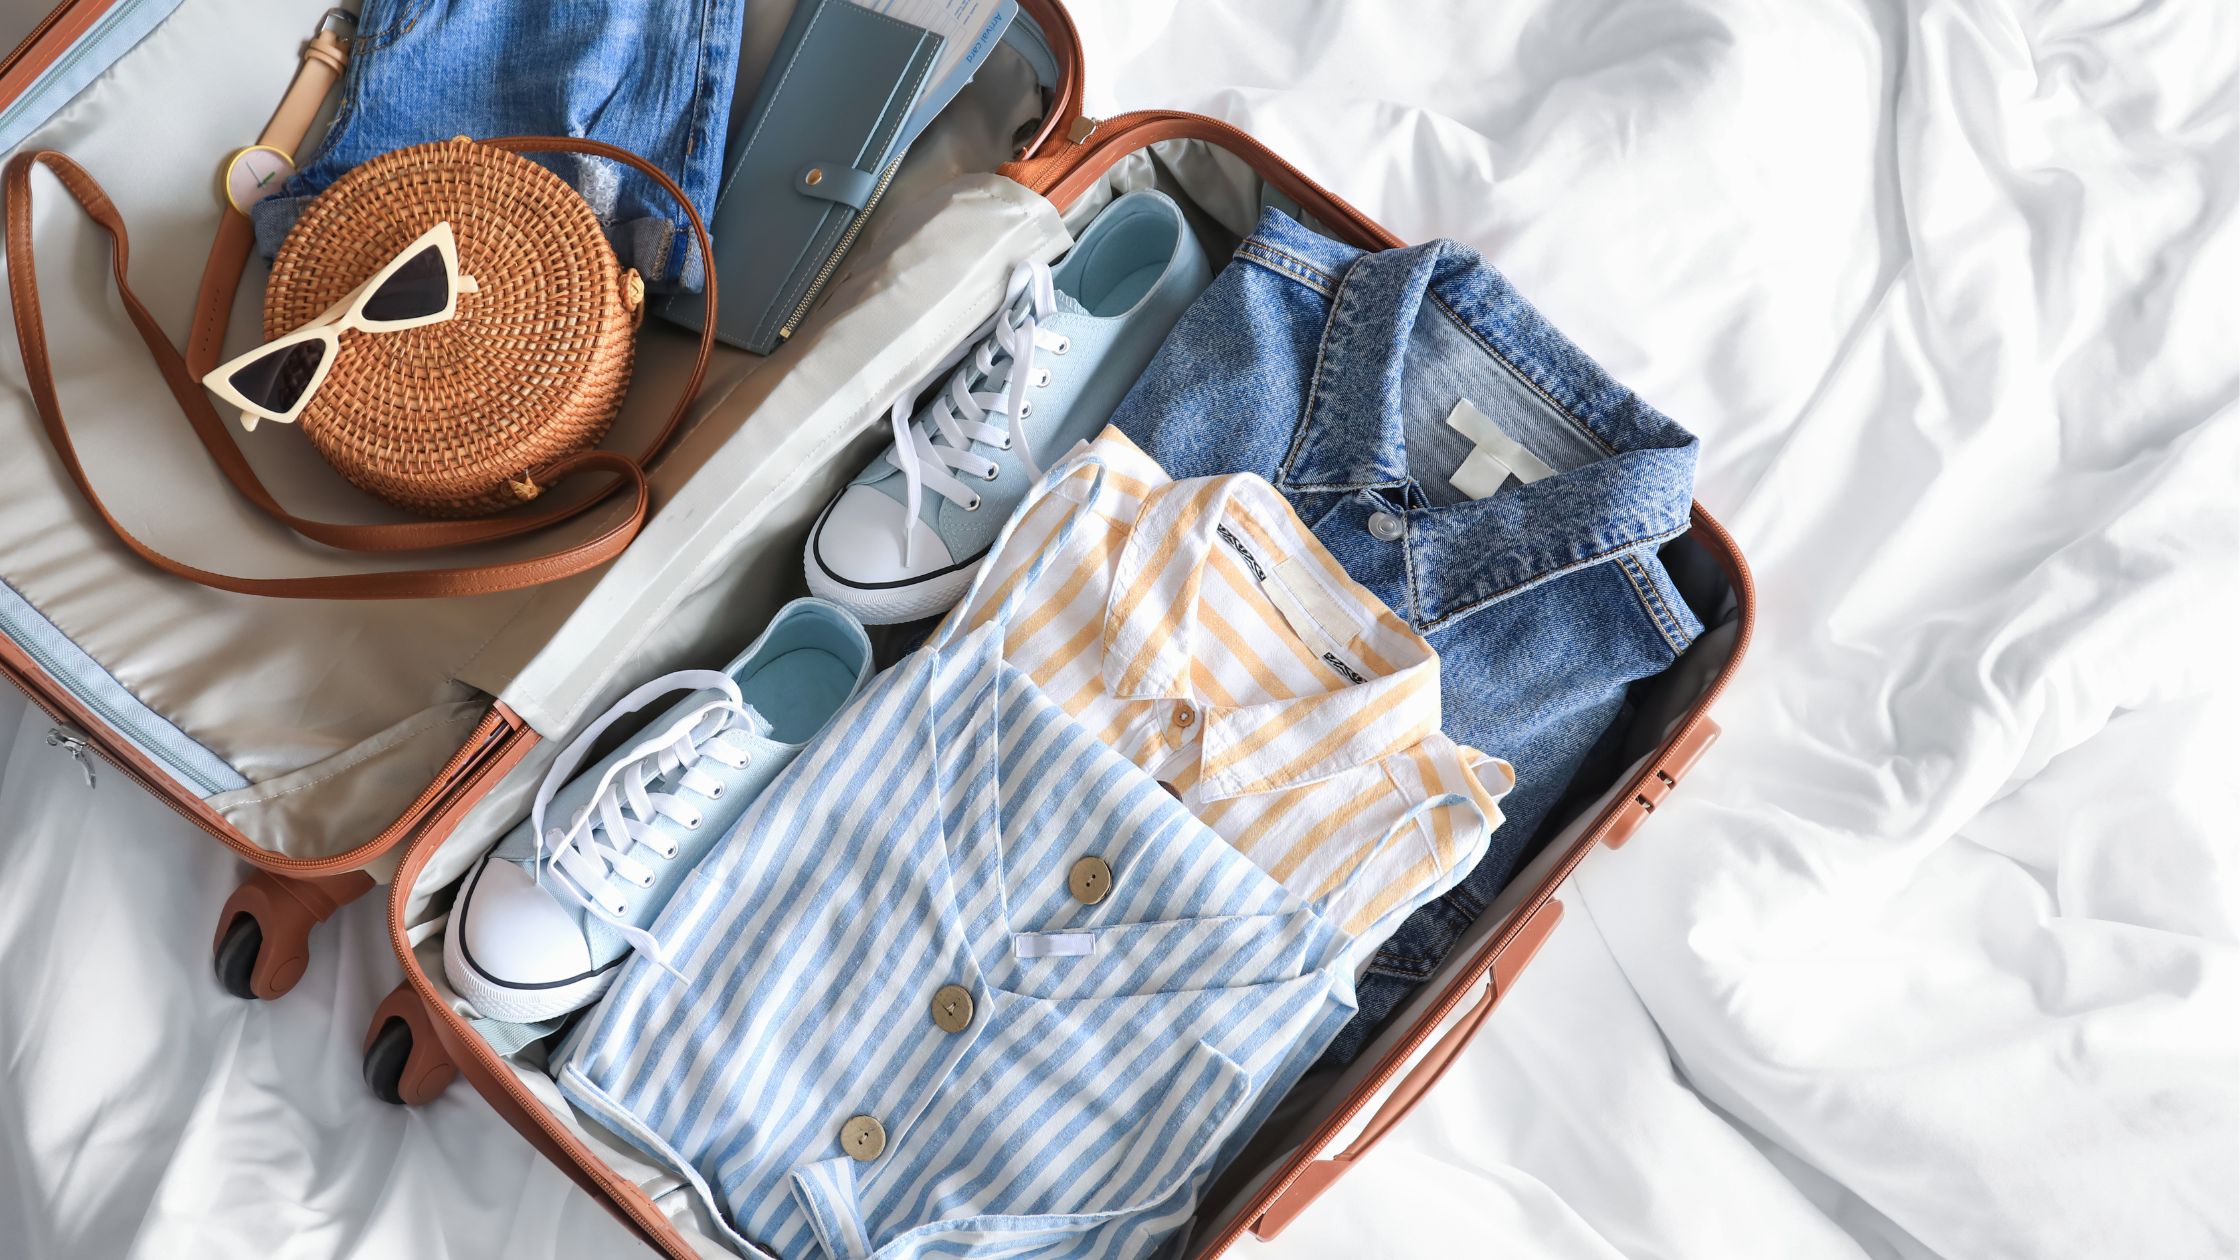 How To Pack A Suitcase To Maximize Space In 13 Easy Steps